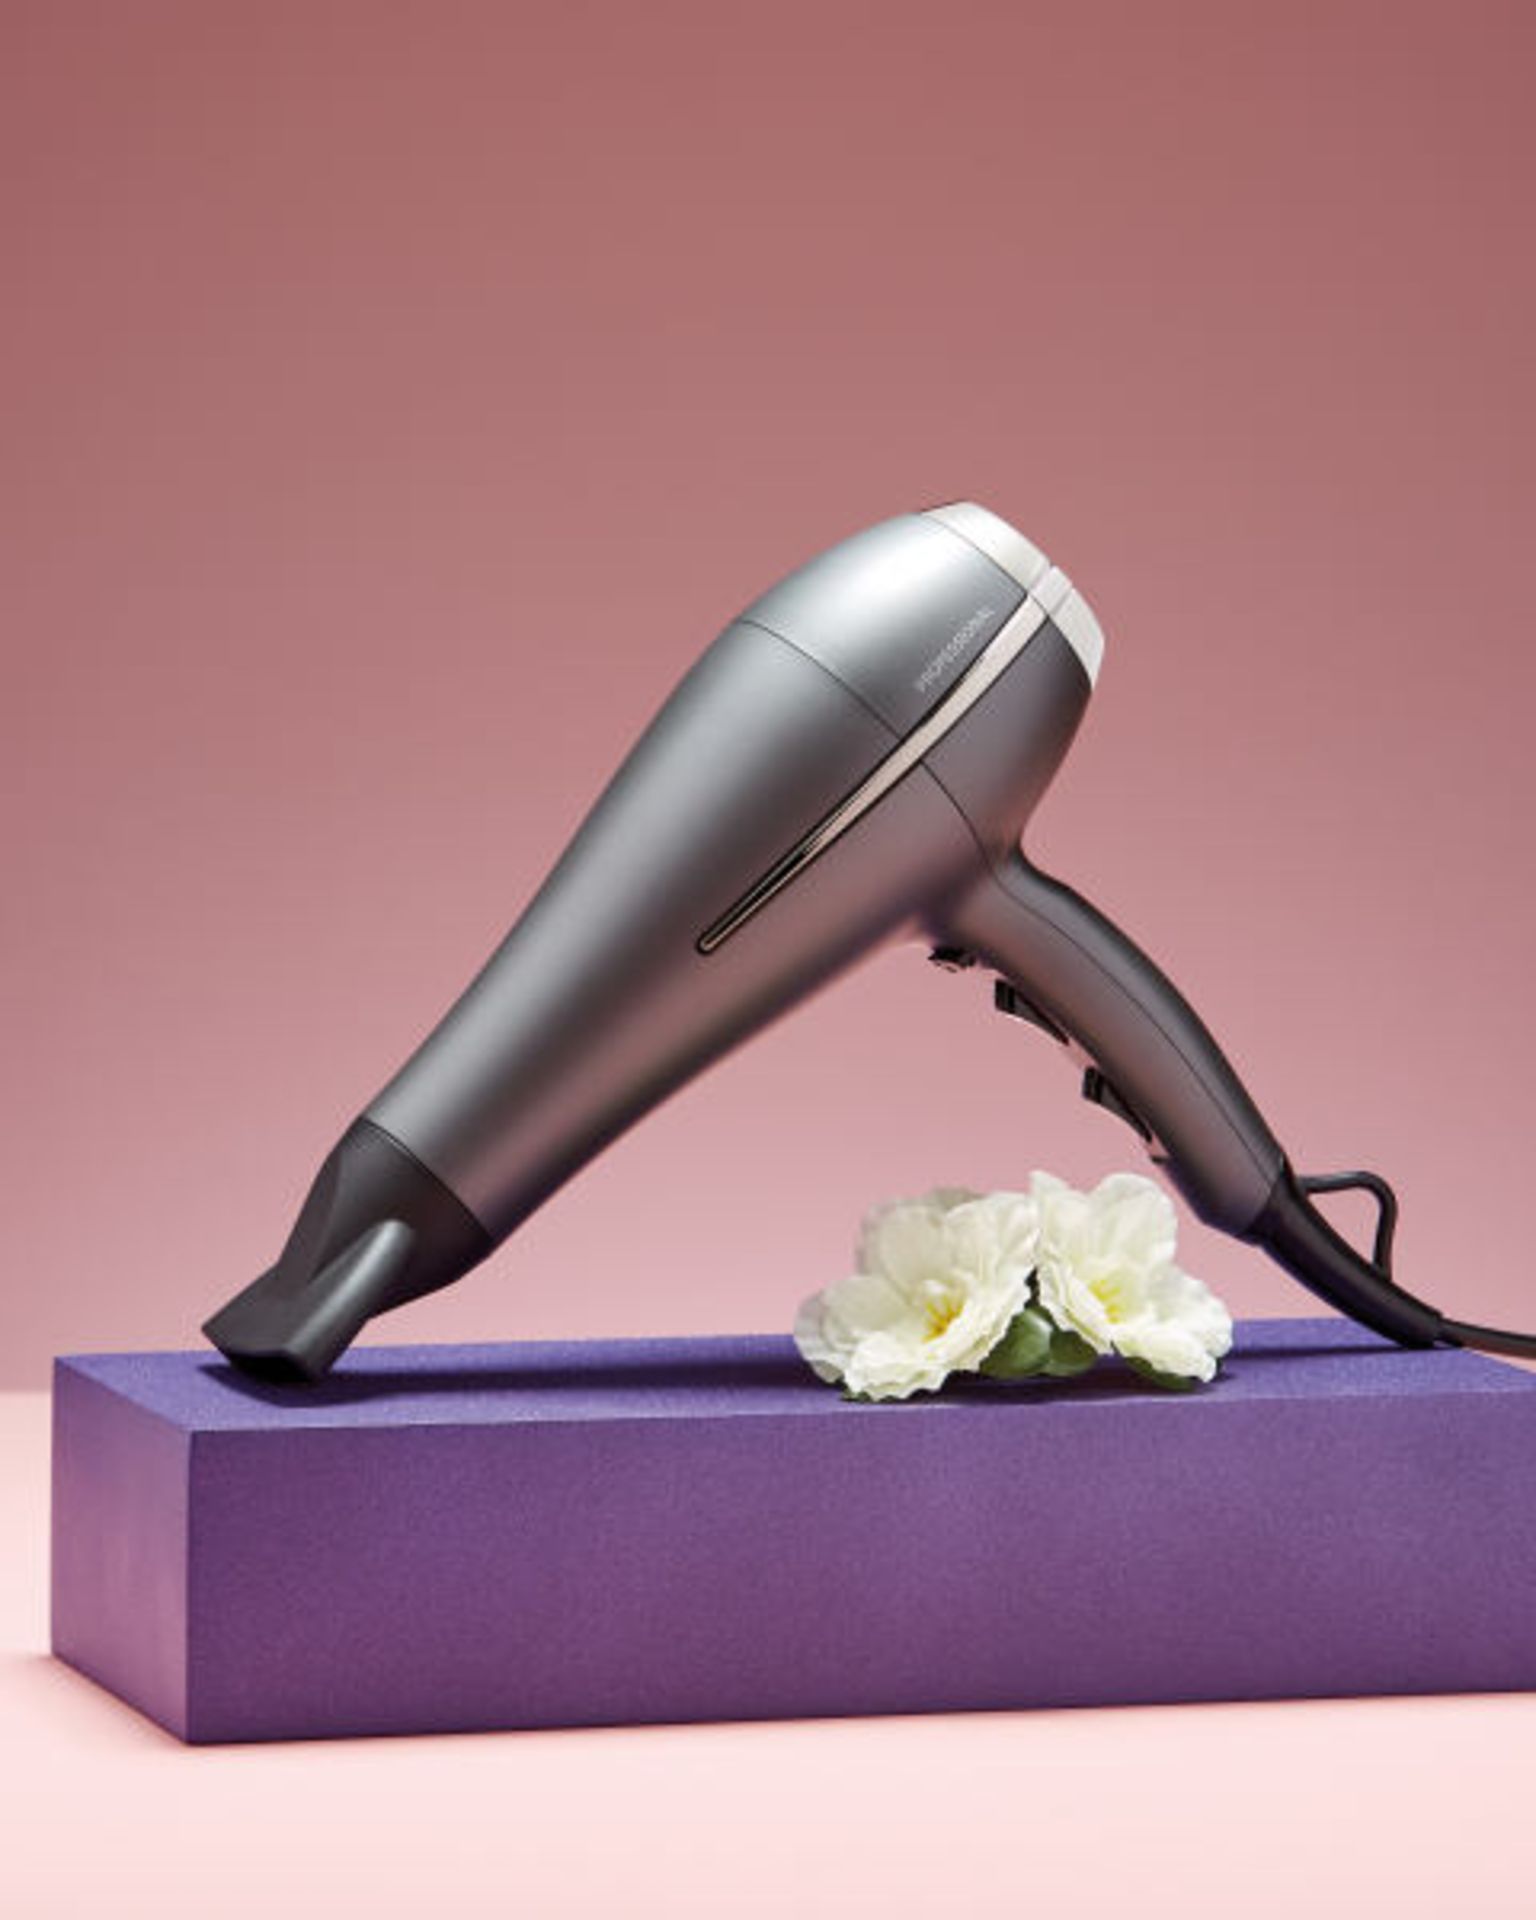 + VAT Brand New Visage Pro Style 2400W Professional Hair Dryer - 3 Temperature Levels - Two Airflow - Image 2 of 2